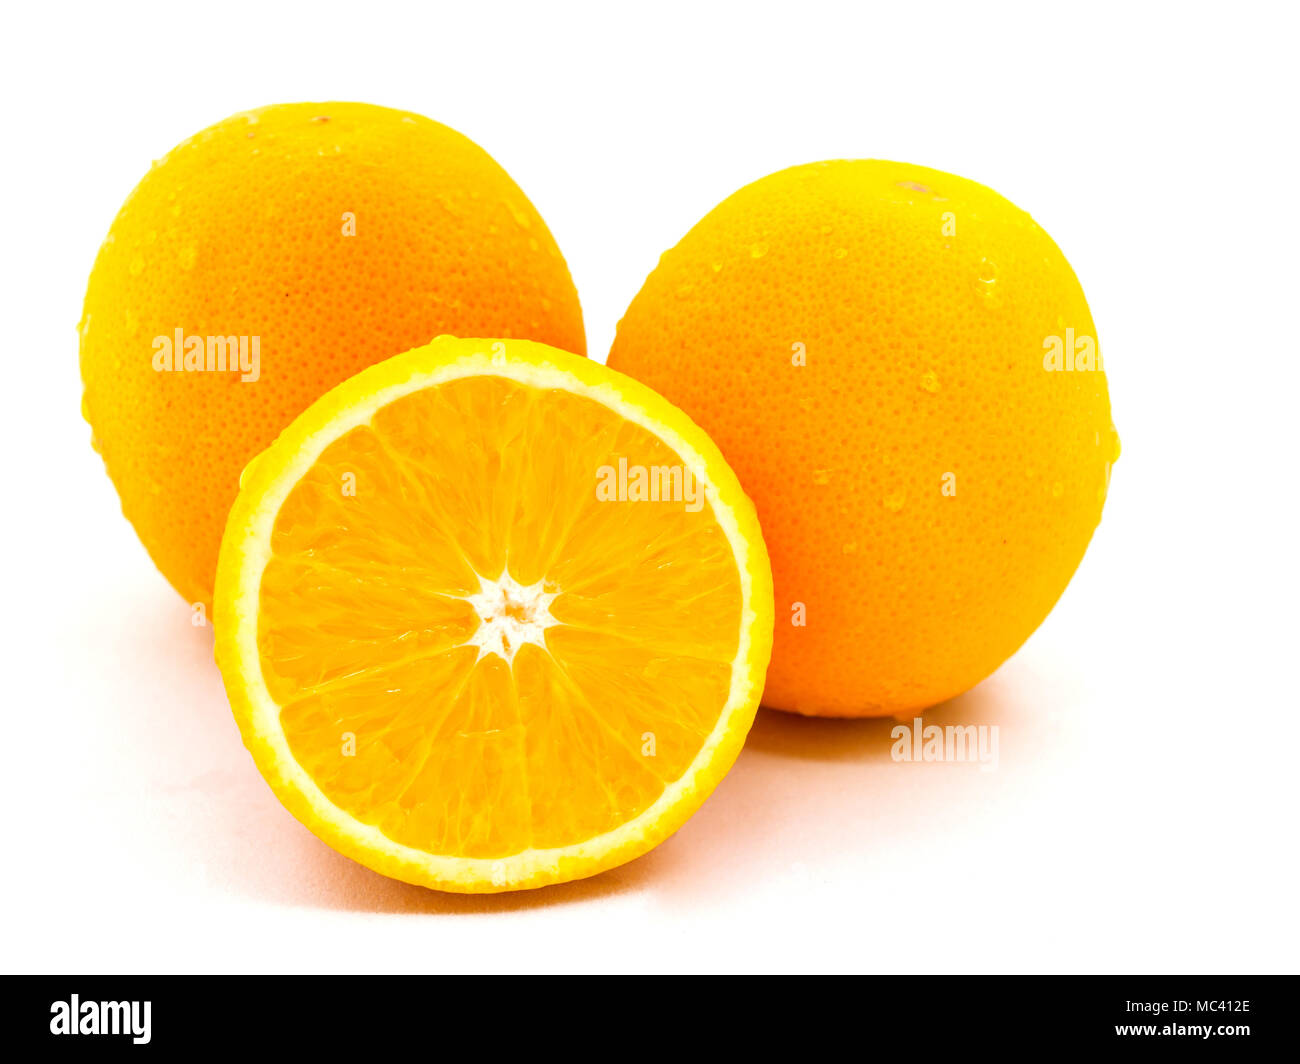 Orange, fruit. , Foods high in vitamin C. Placed on a white background. Stock Photo